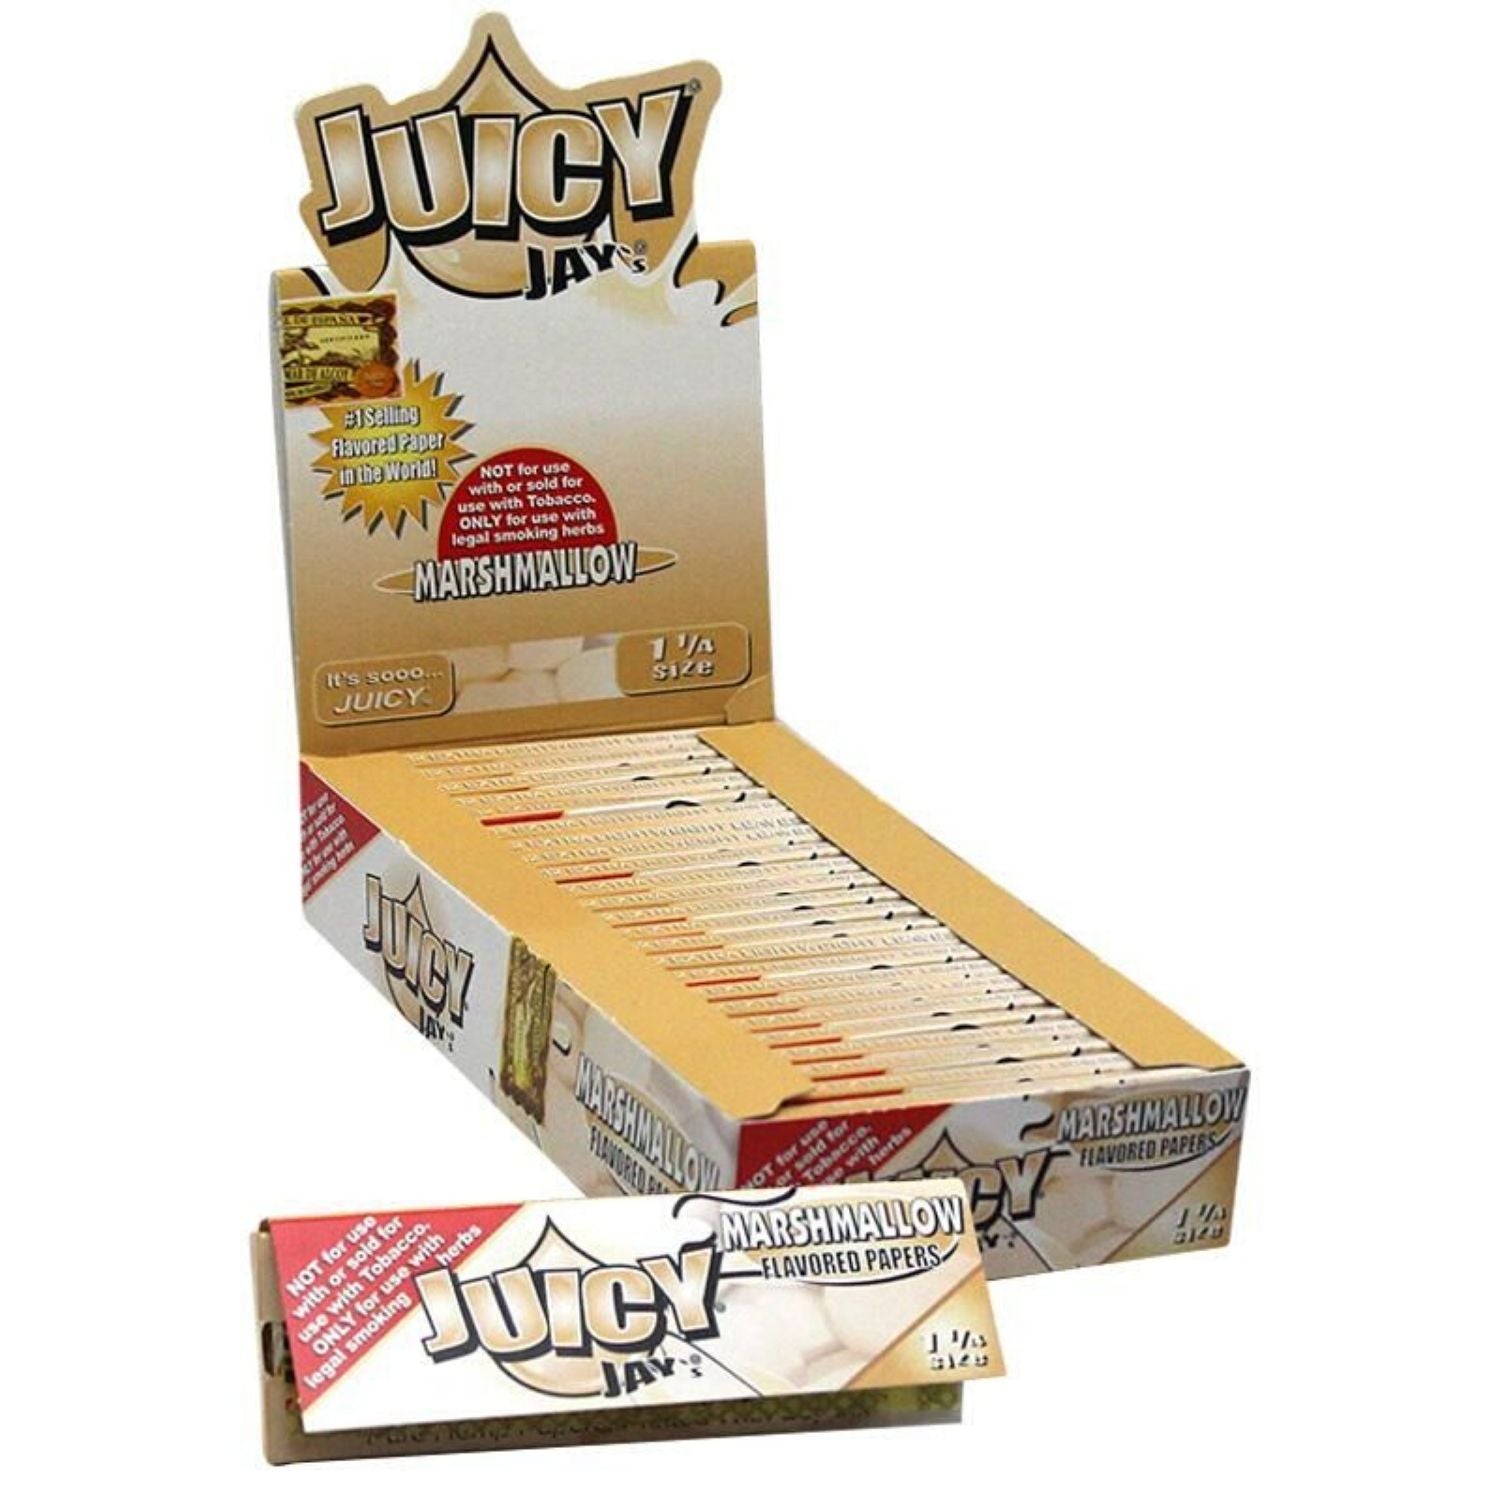 Juicy Jay Rolling Papers - Marshmallow Flavor - 1 1/4 Size